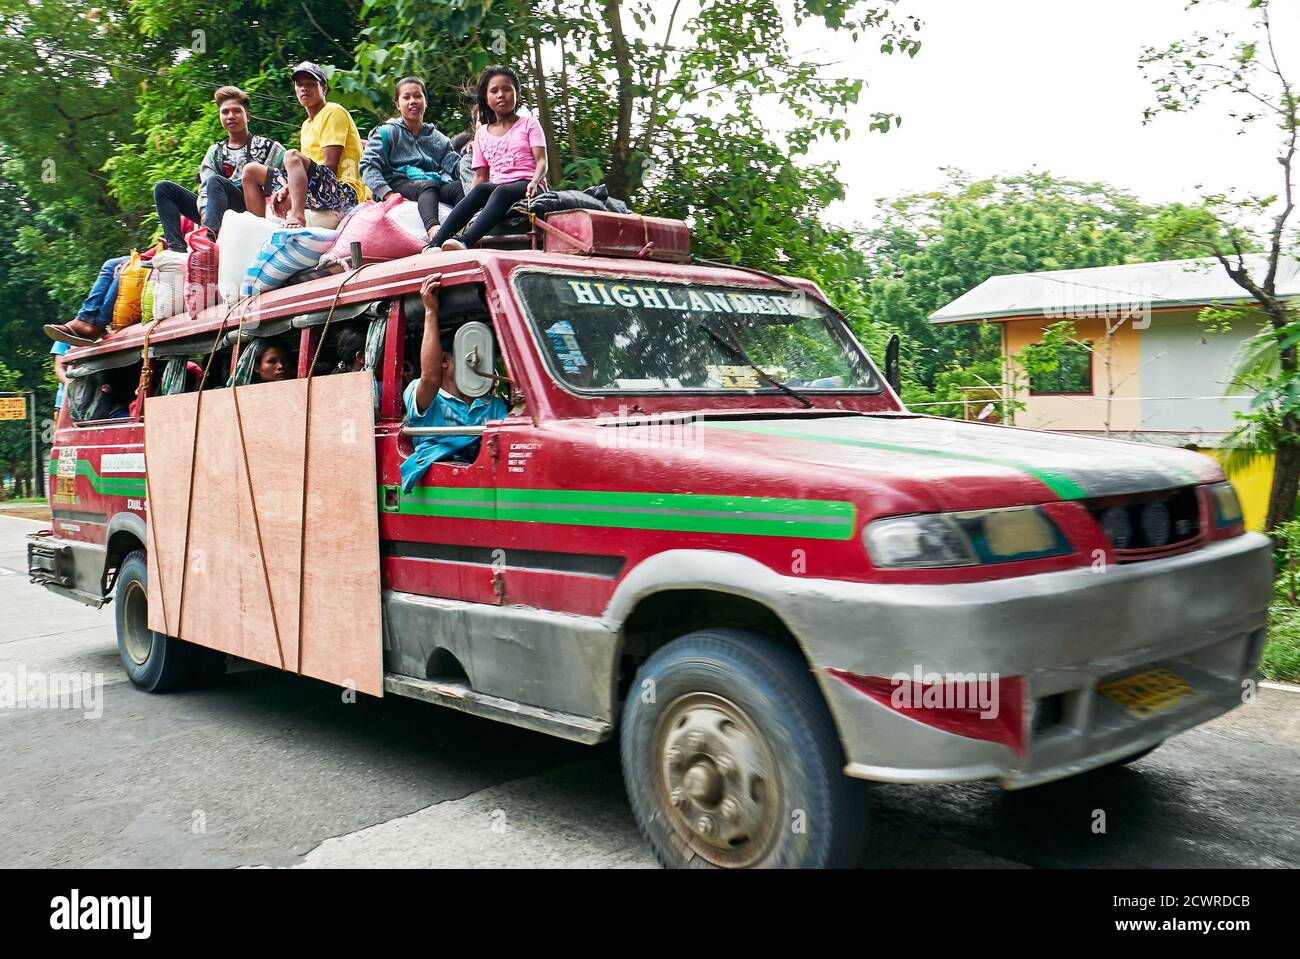 An old colorful philippine jeepney style truck with young people sitting on the roof together with rice sacks, Antique, Visayas, Philippines, Asia Stock Photo